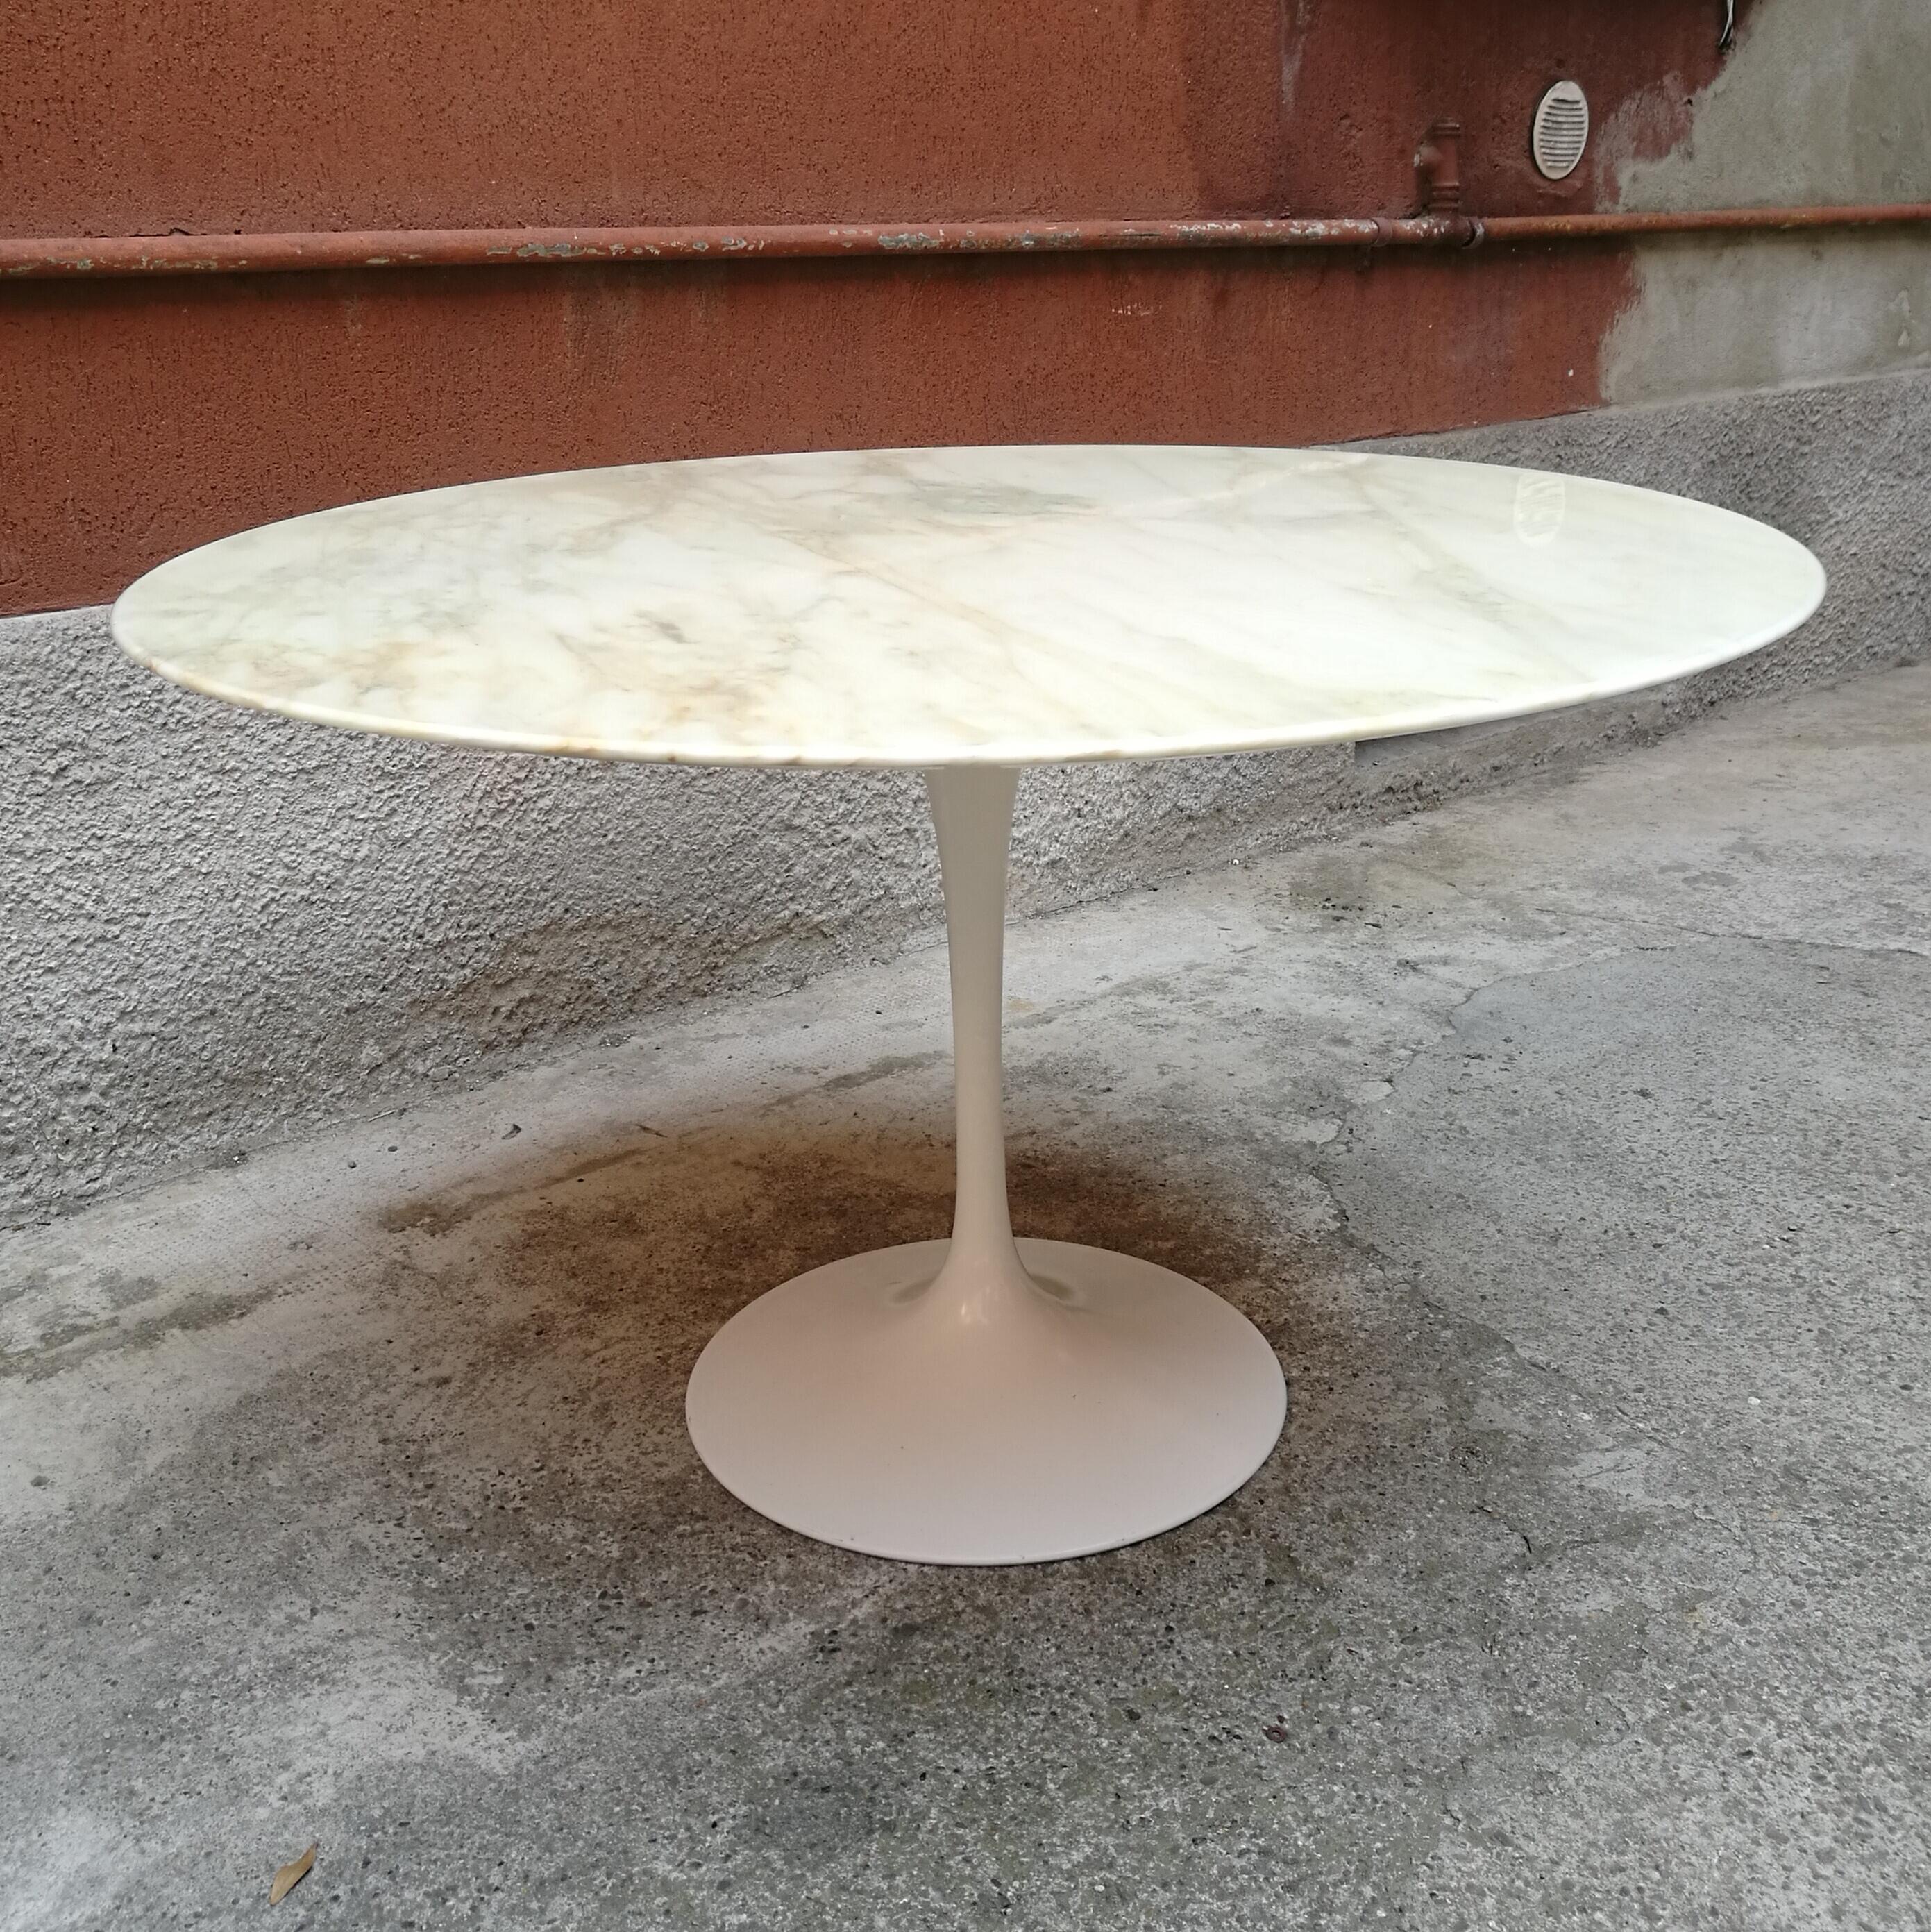 Late 20th Century Calcutta Marble Dining Table, by Eero Saarinen for Knoll, 1973